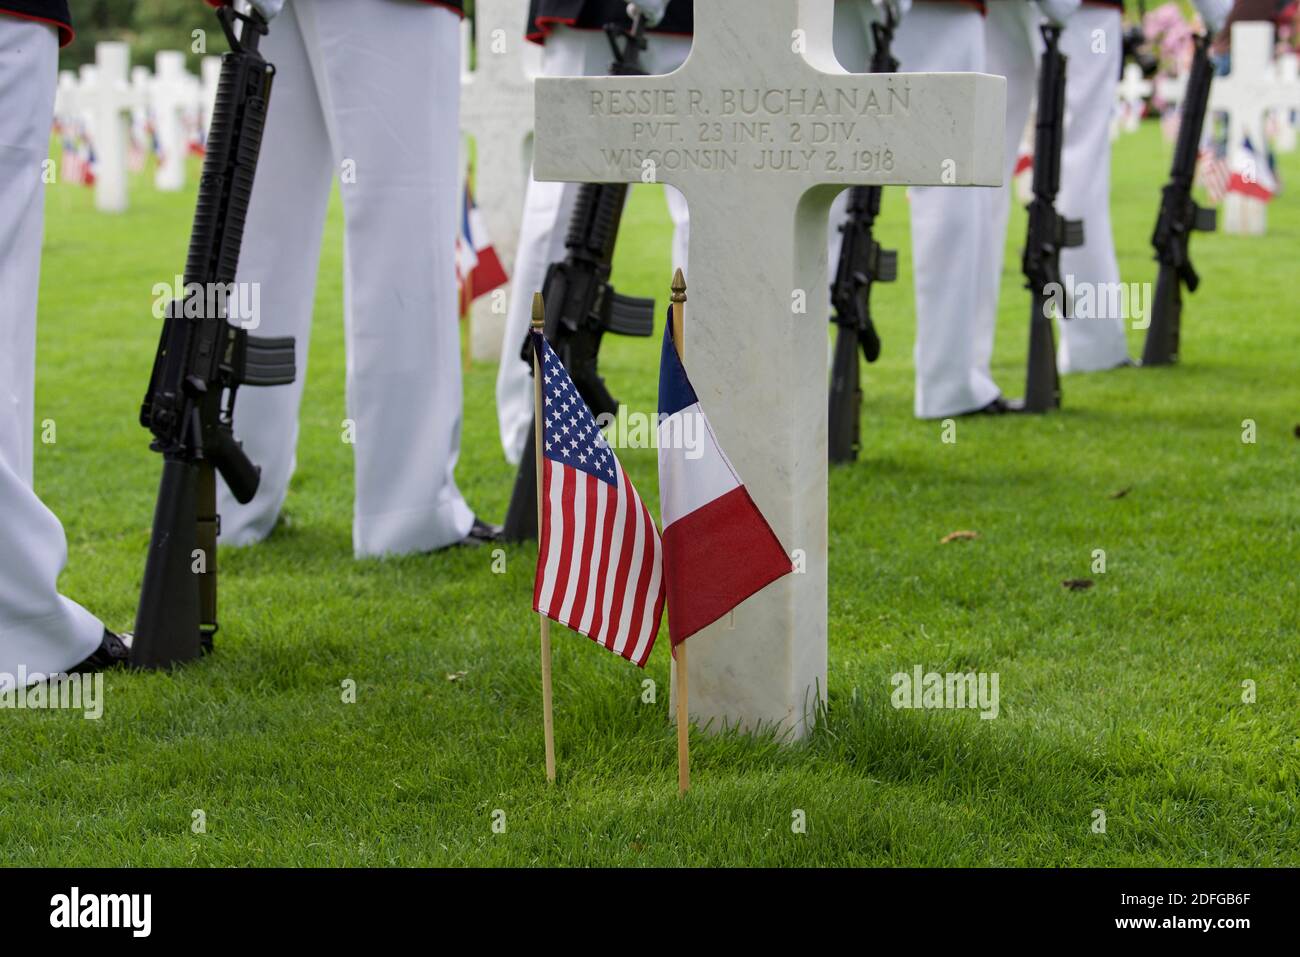 Hand out file photo dated May 27, 2018 of Marines with the firing detail of the 6th Marine Regiment stand ready during the Battle of Belleau Wood Centennial ceremony at the Aisne-Marne American Cemetery, France. The Ceremony commemorated the sacrifices made at WWI. President Trump reportedly skipped his scheduled visit to the Aisne-Marne American Cemetery near Paris in 2018 after dismissing the U.S. soldiers who died during the Battle of Belleau Wood as “losers.” According to a report in The Atlantic published Thursday, Trump’s excuses of “the helicopter couldn’t fly” and that the Secret Servi Stock Photo